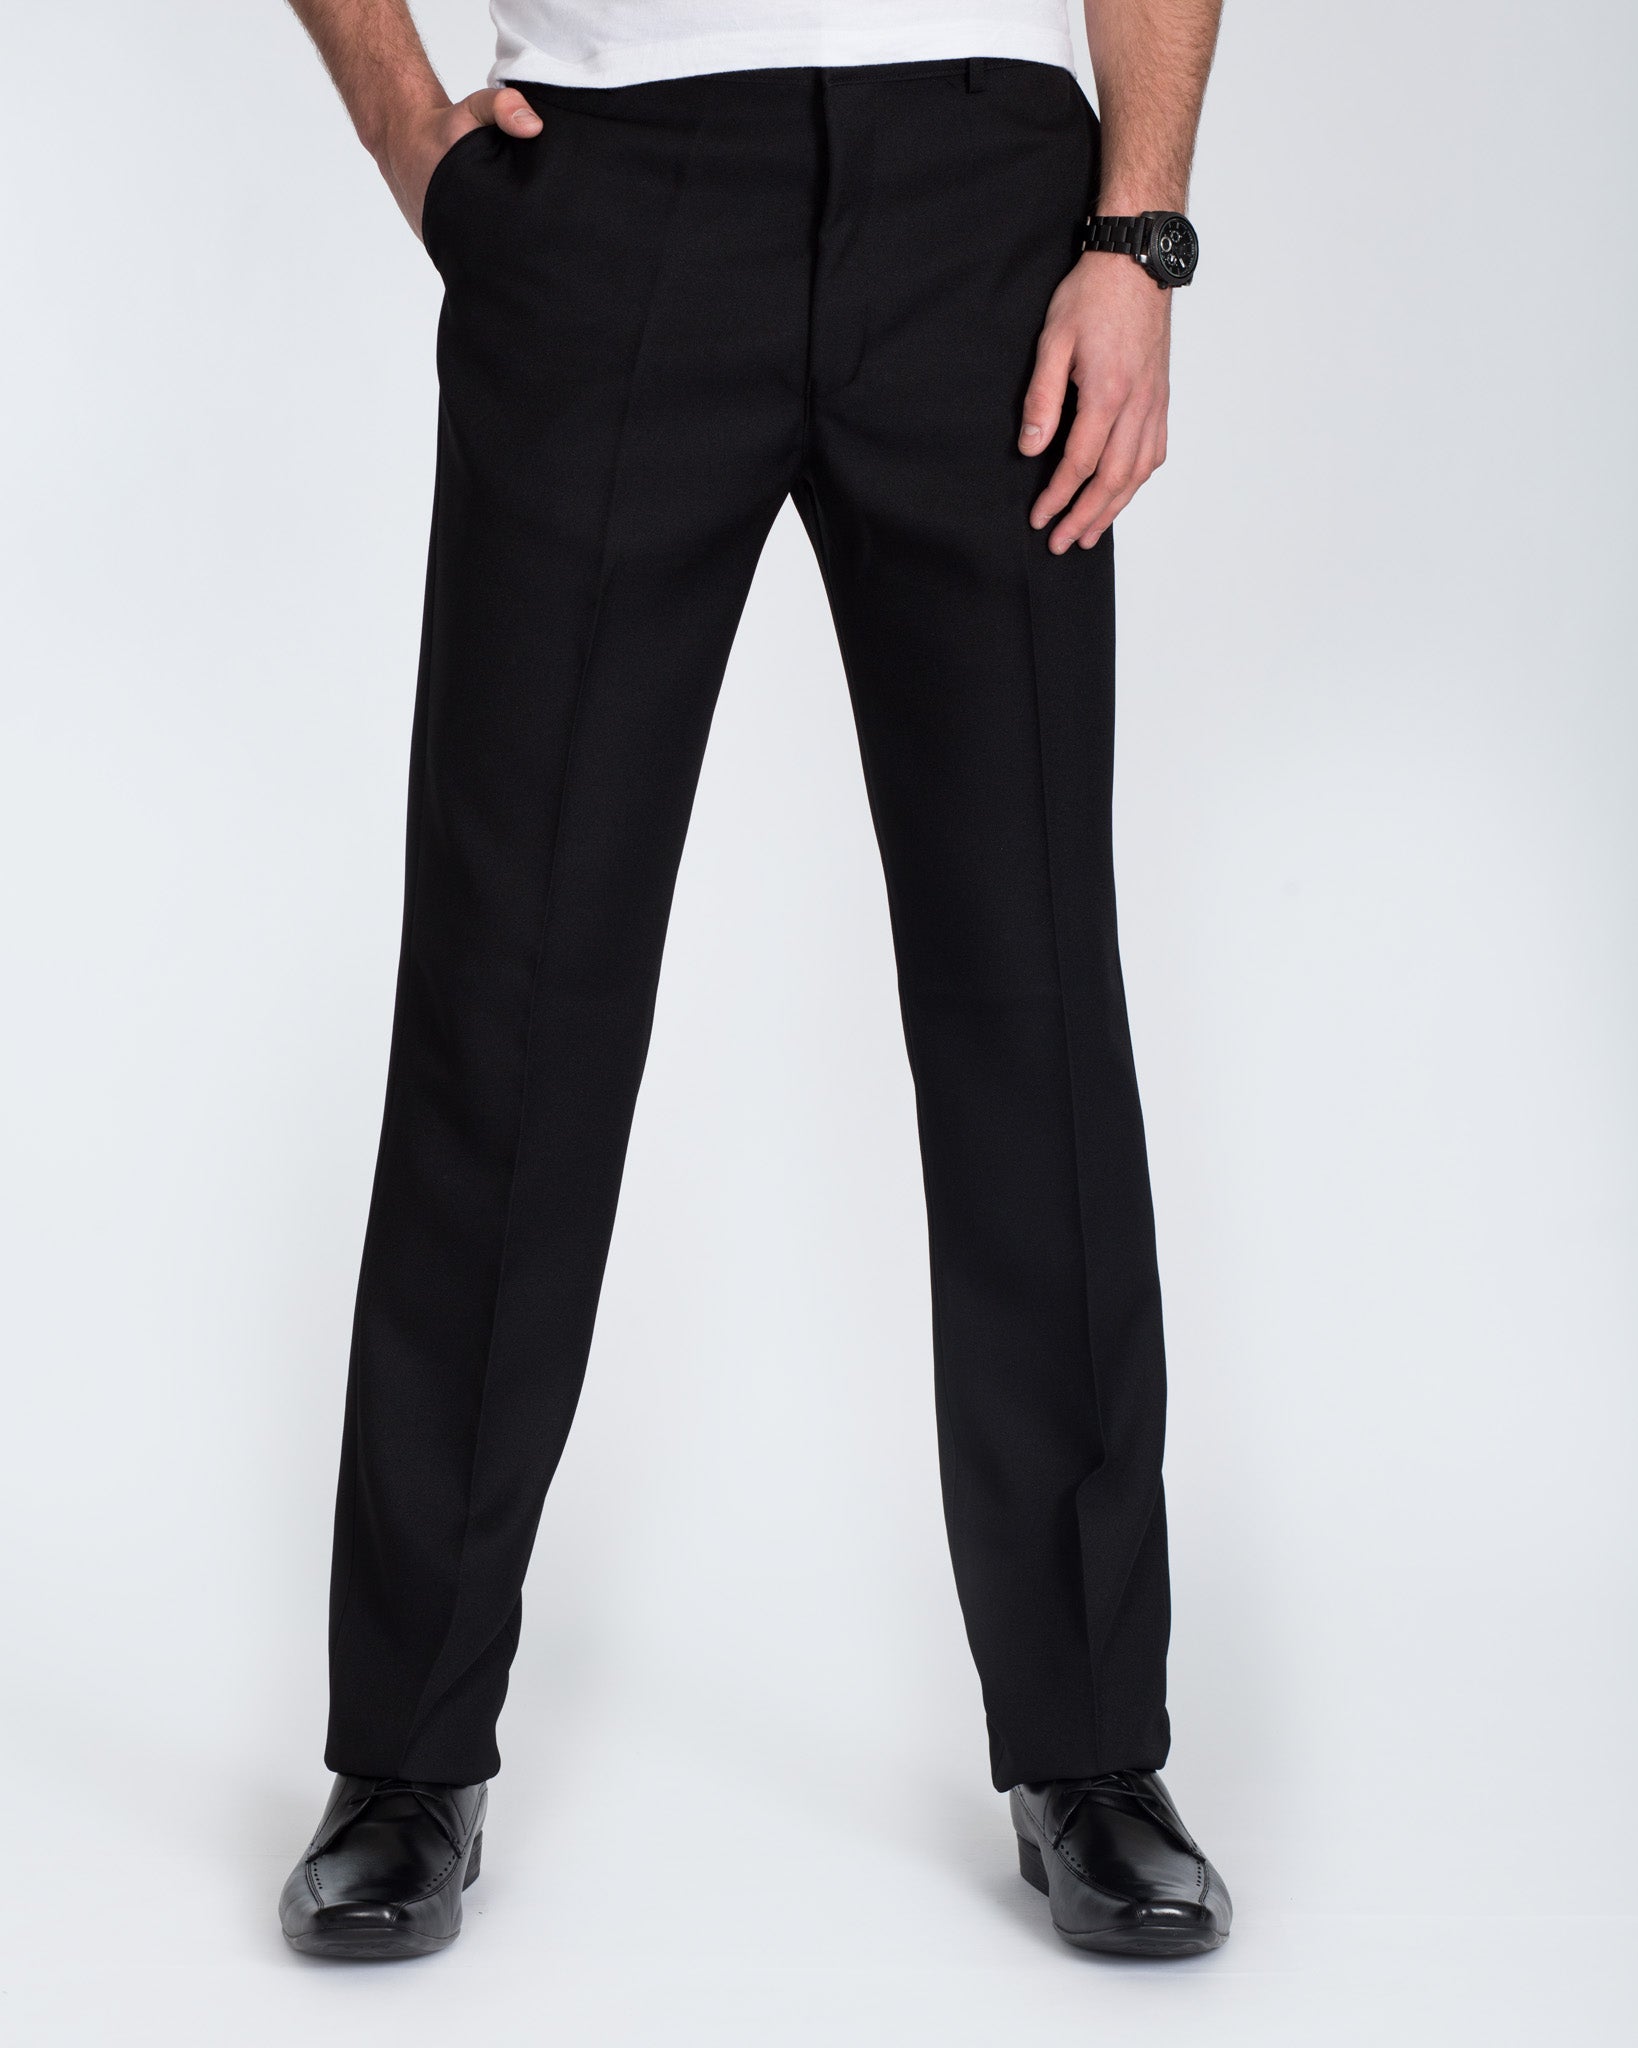 Carabou Stretch Tall Trousers (black)